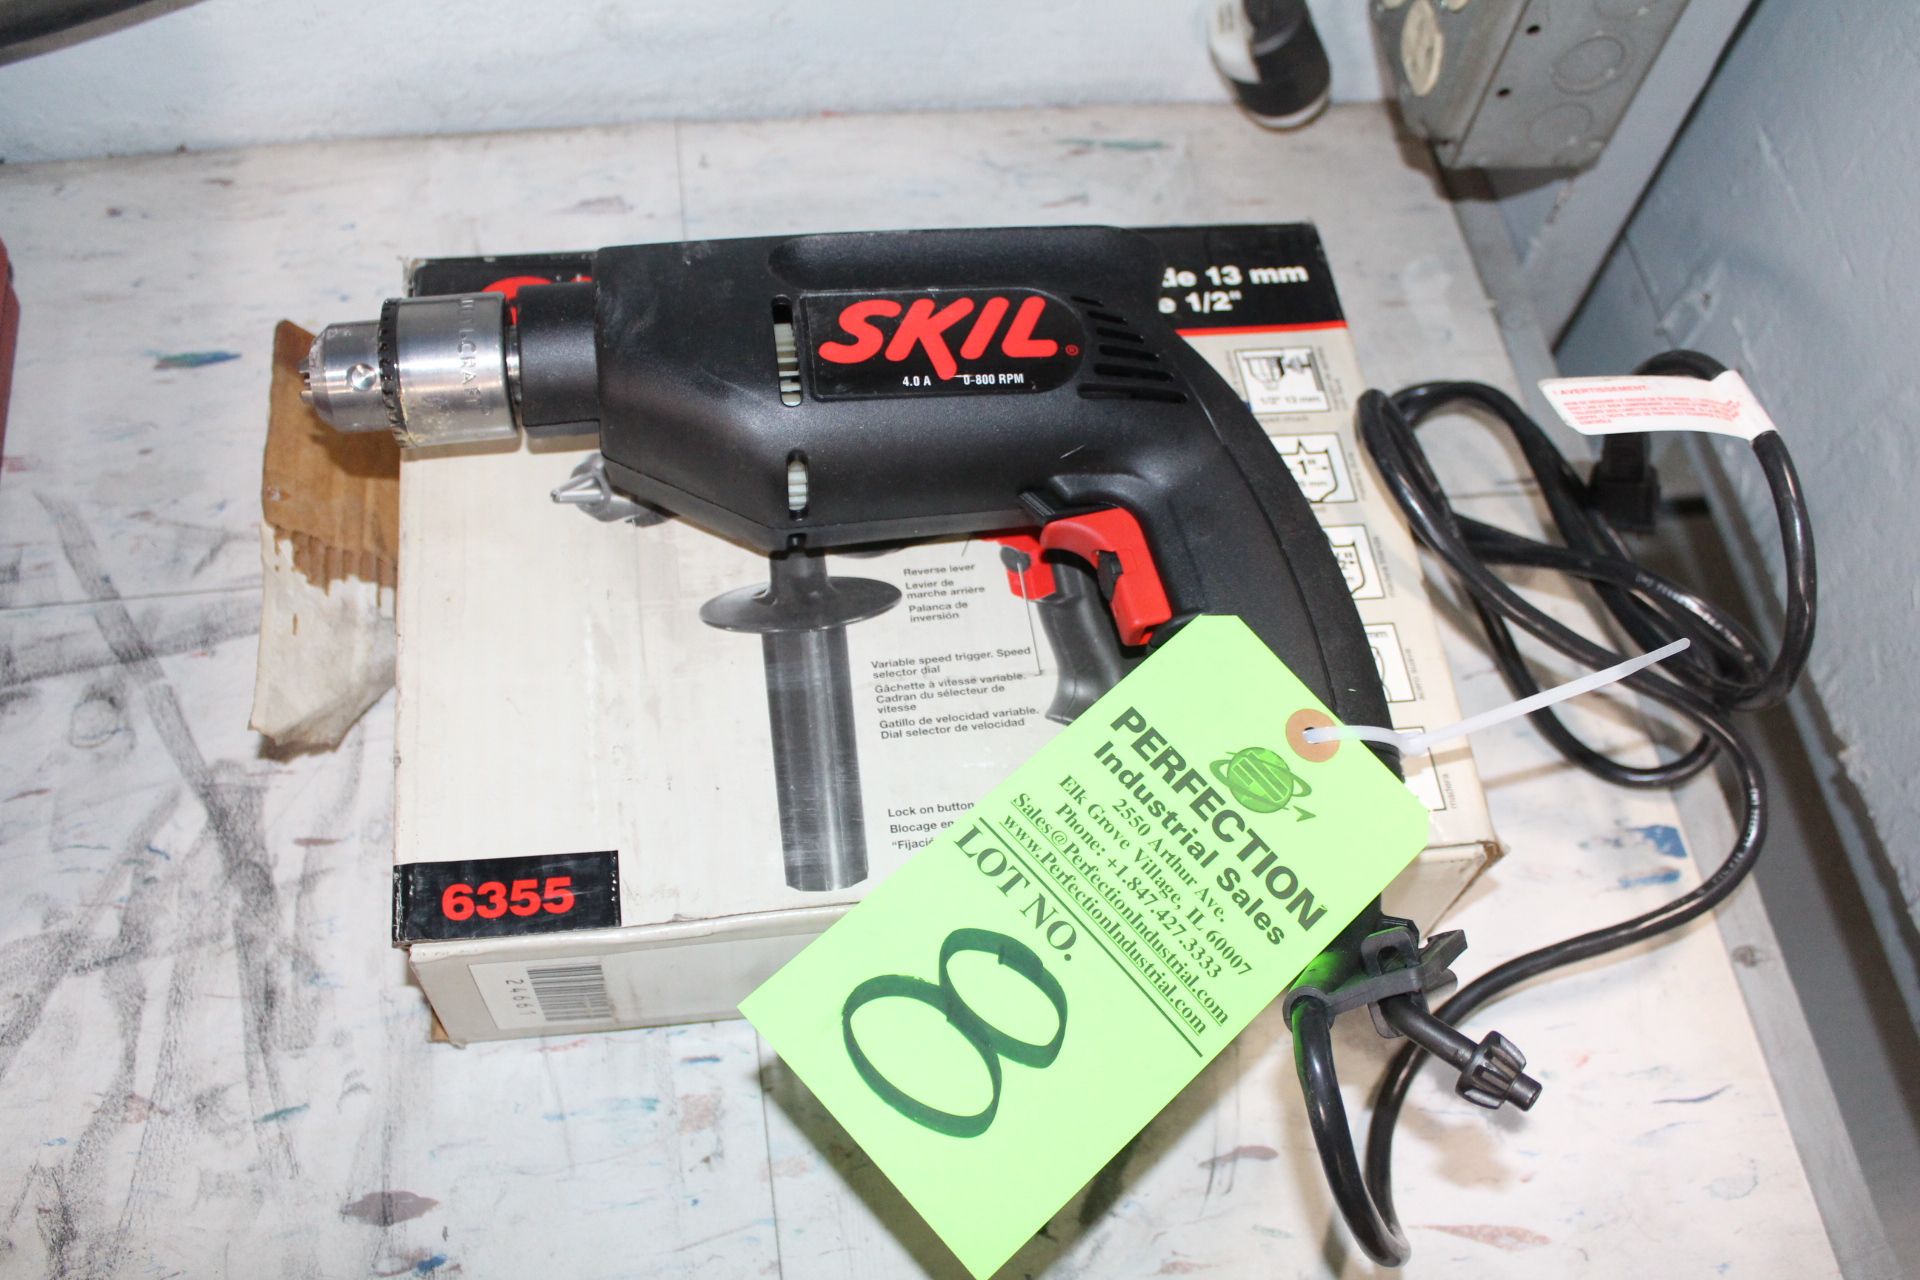 Skil 1/2" Variable Speed Electric Drill